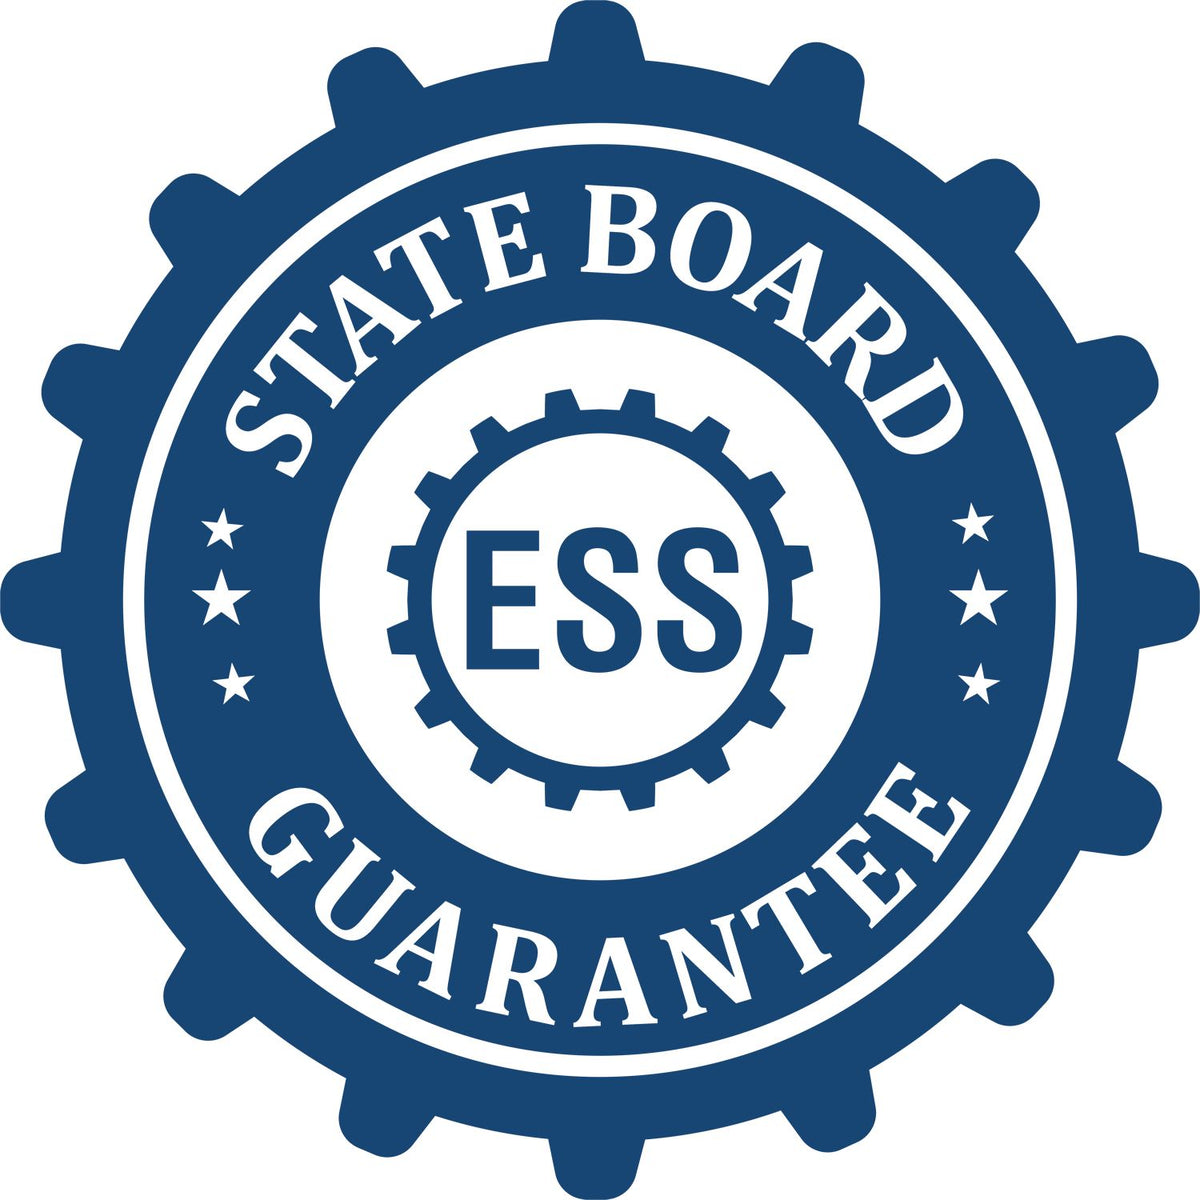 An emblem in a gear shape illustrating a state board guarantee for the Hybrid Wyoming Land Surveyor Seal